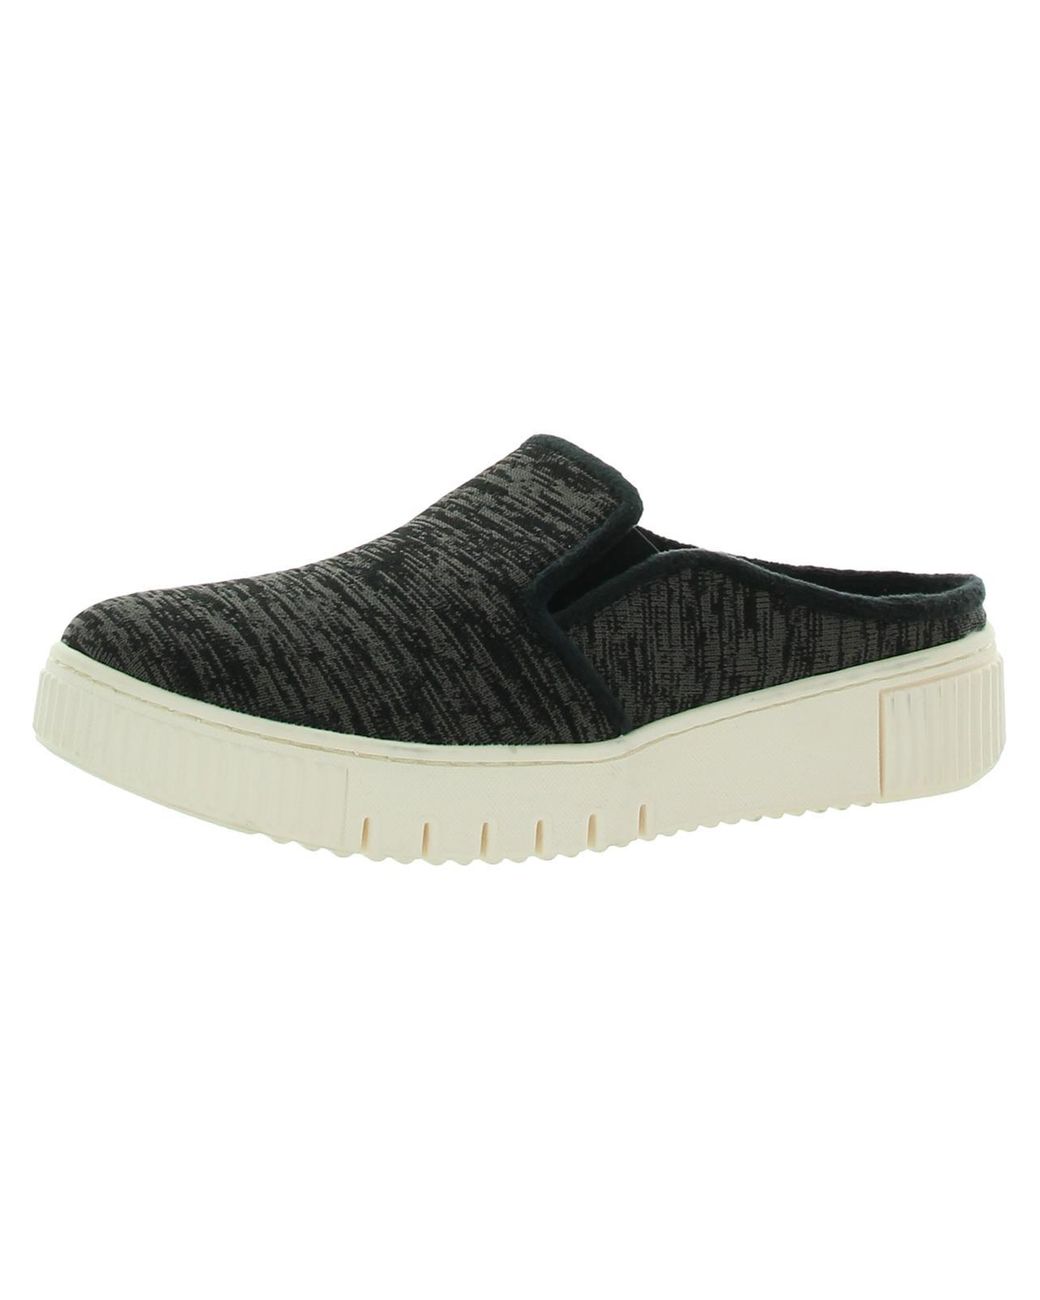 SOUL Naturalizer Truly Lifestyle Slip-on Sneakers in Black | Lyst